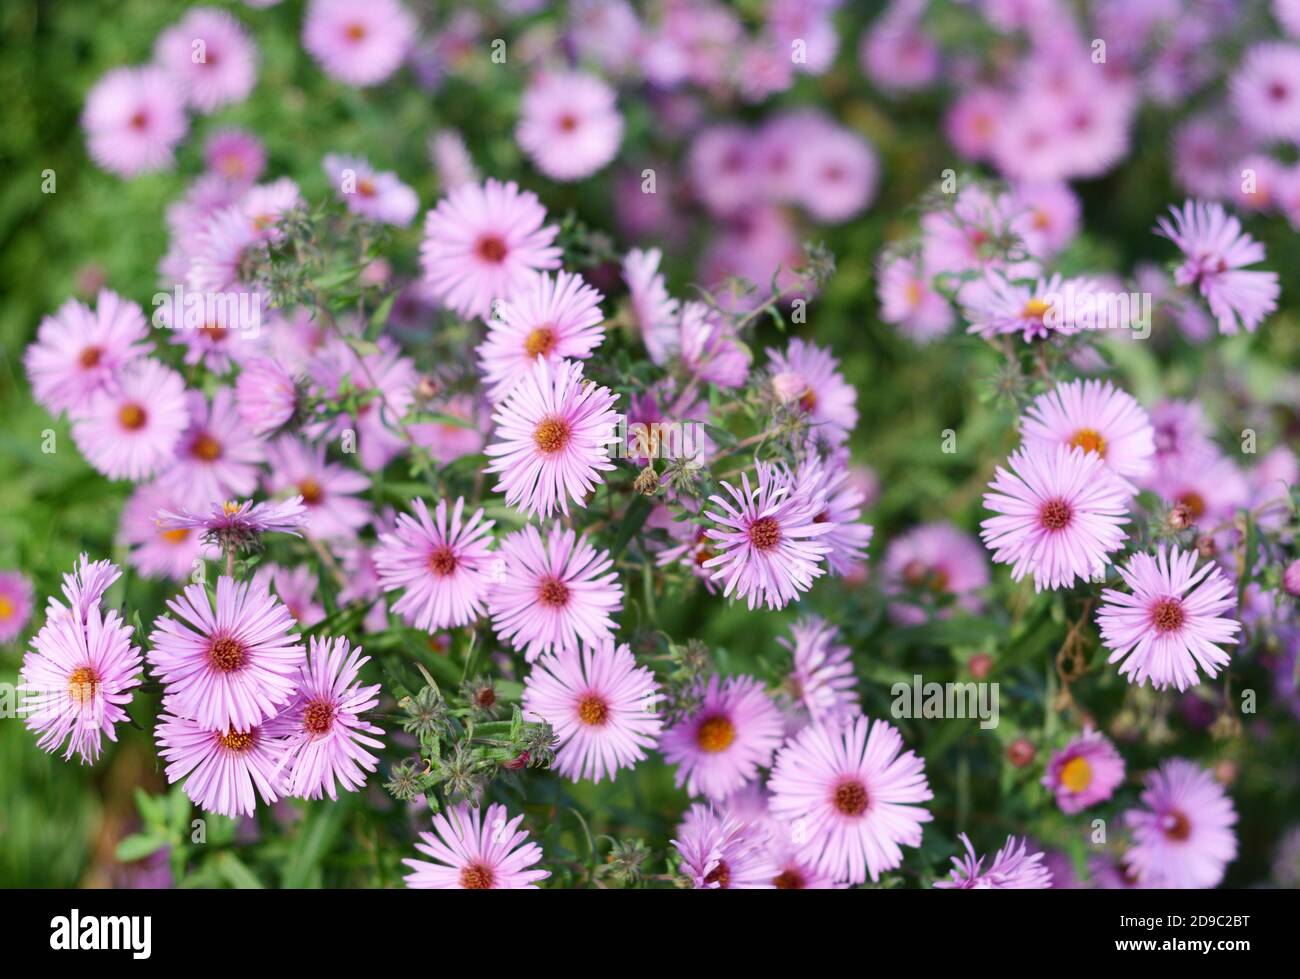 A close-up on a pink aster dumosus flowering plant, bushy aster richly blooming in autumn. Stock Photo